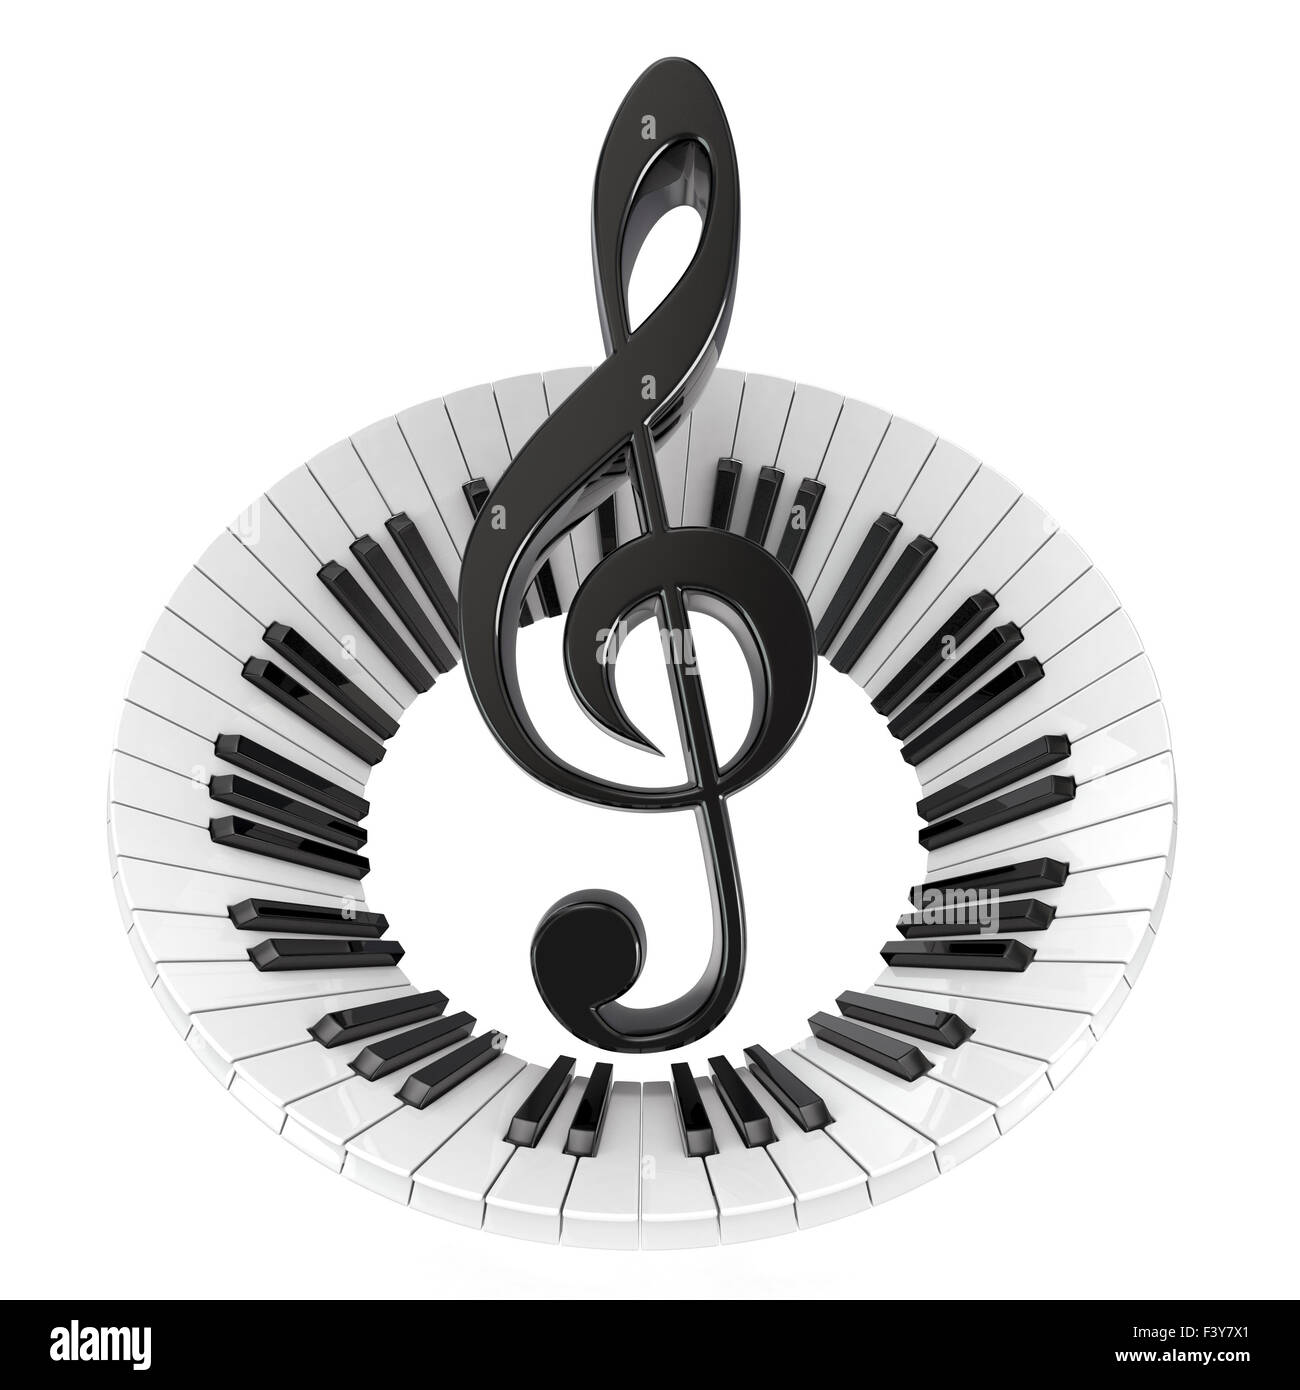 Treble clef in abstract piano keyboard. Symbol of music. 3D render illustration isolated on white background Stock Photo